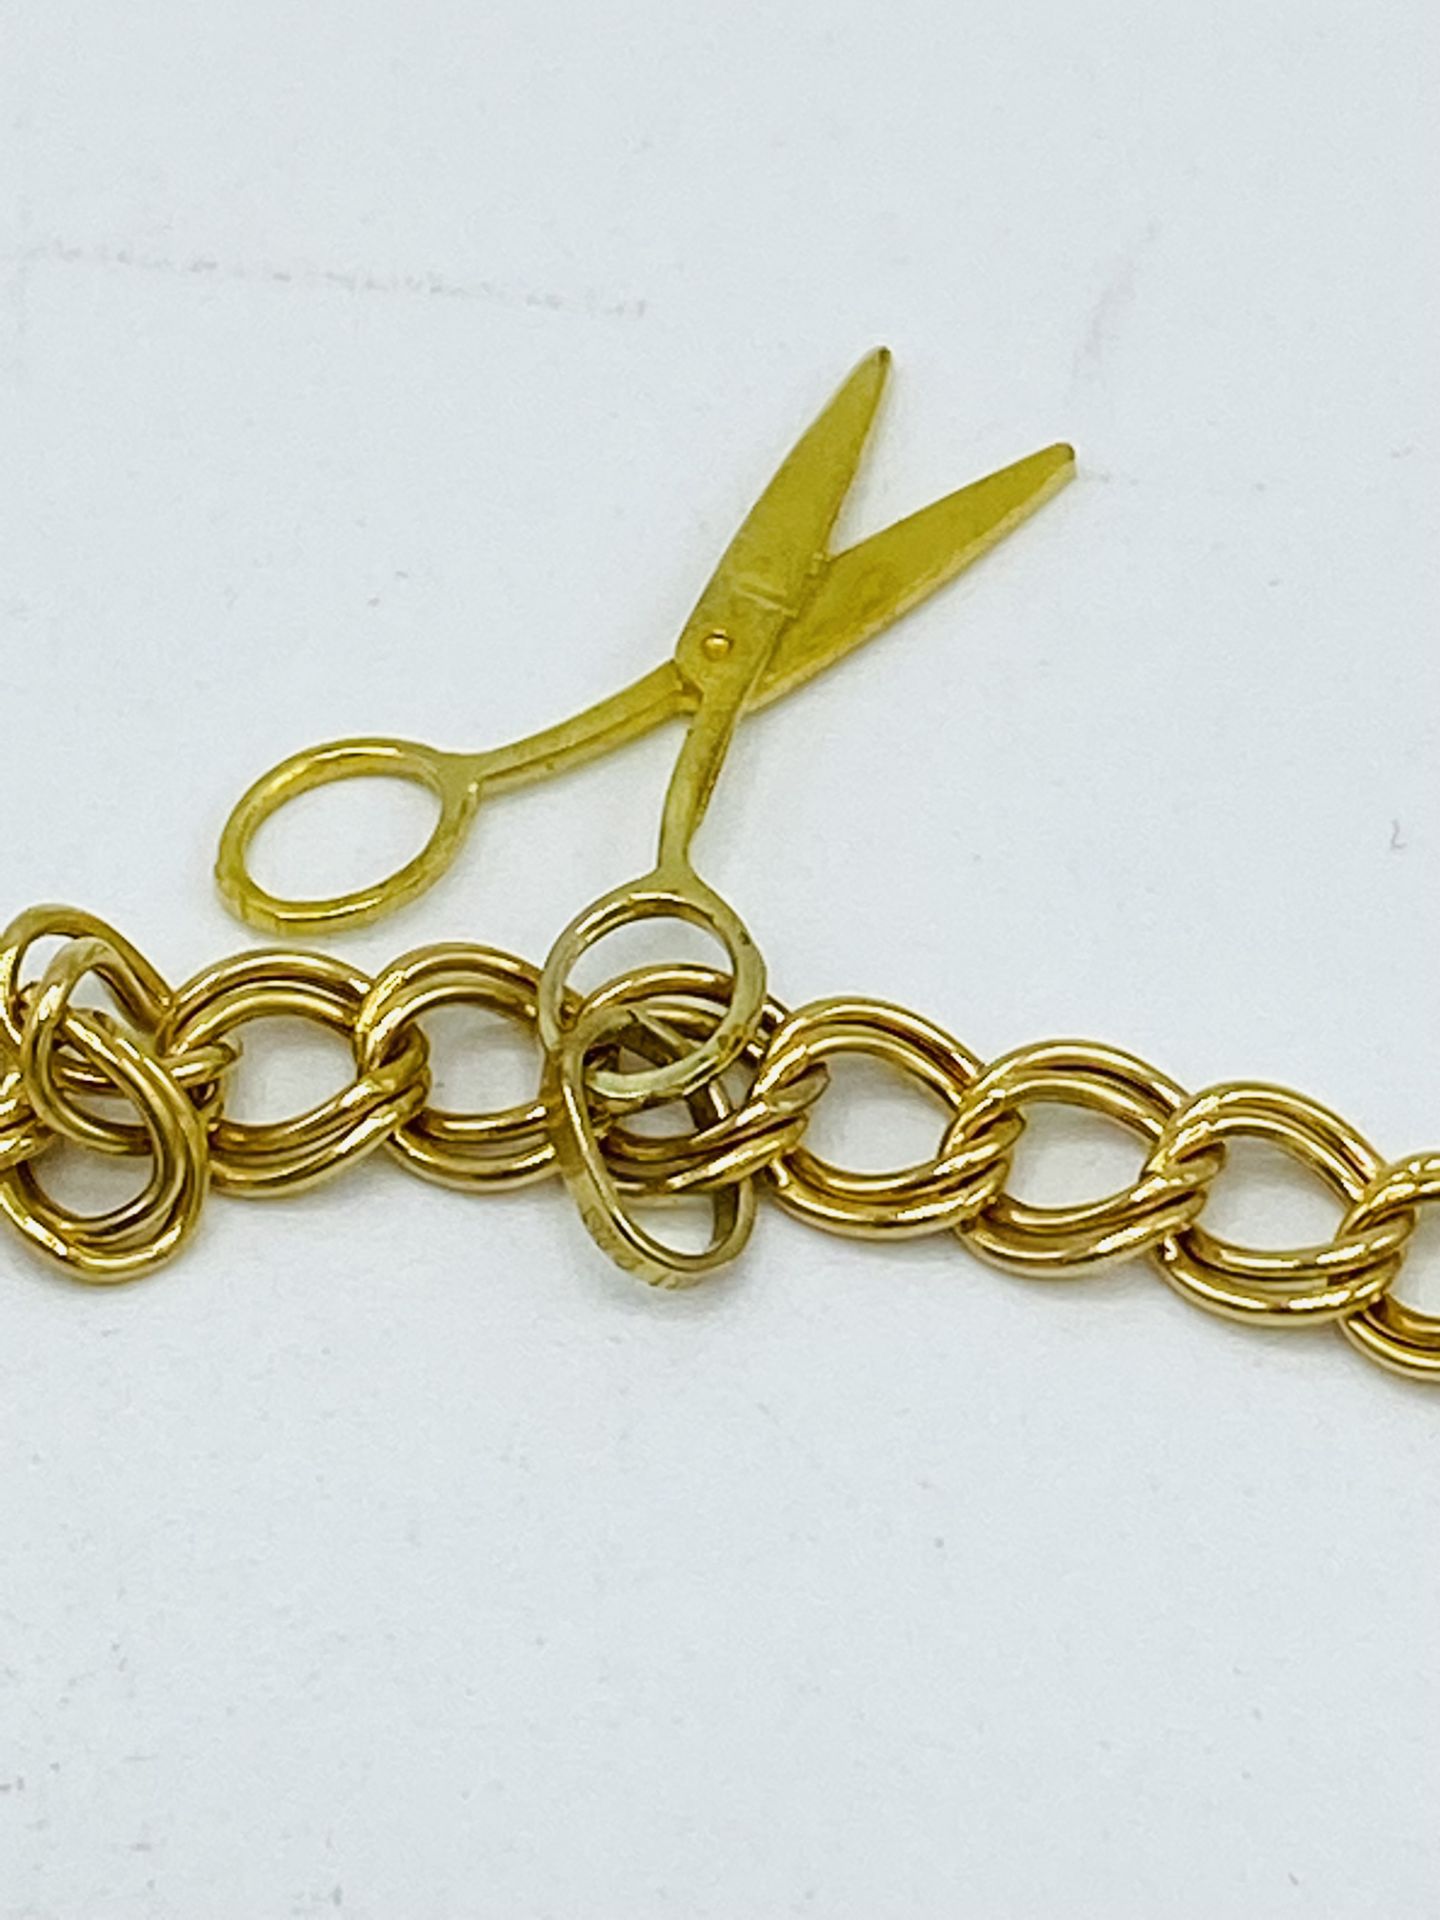 Two 9ct gold bracelets - Image 3 of 4